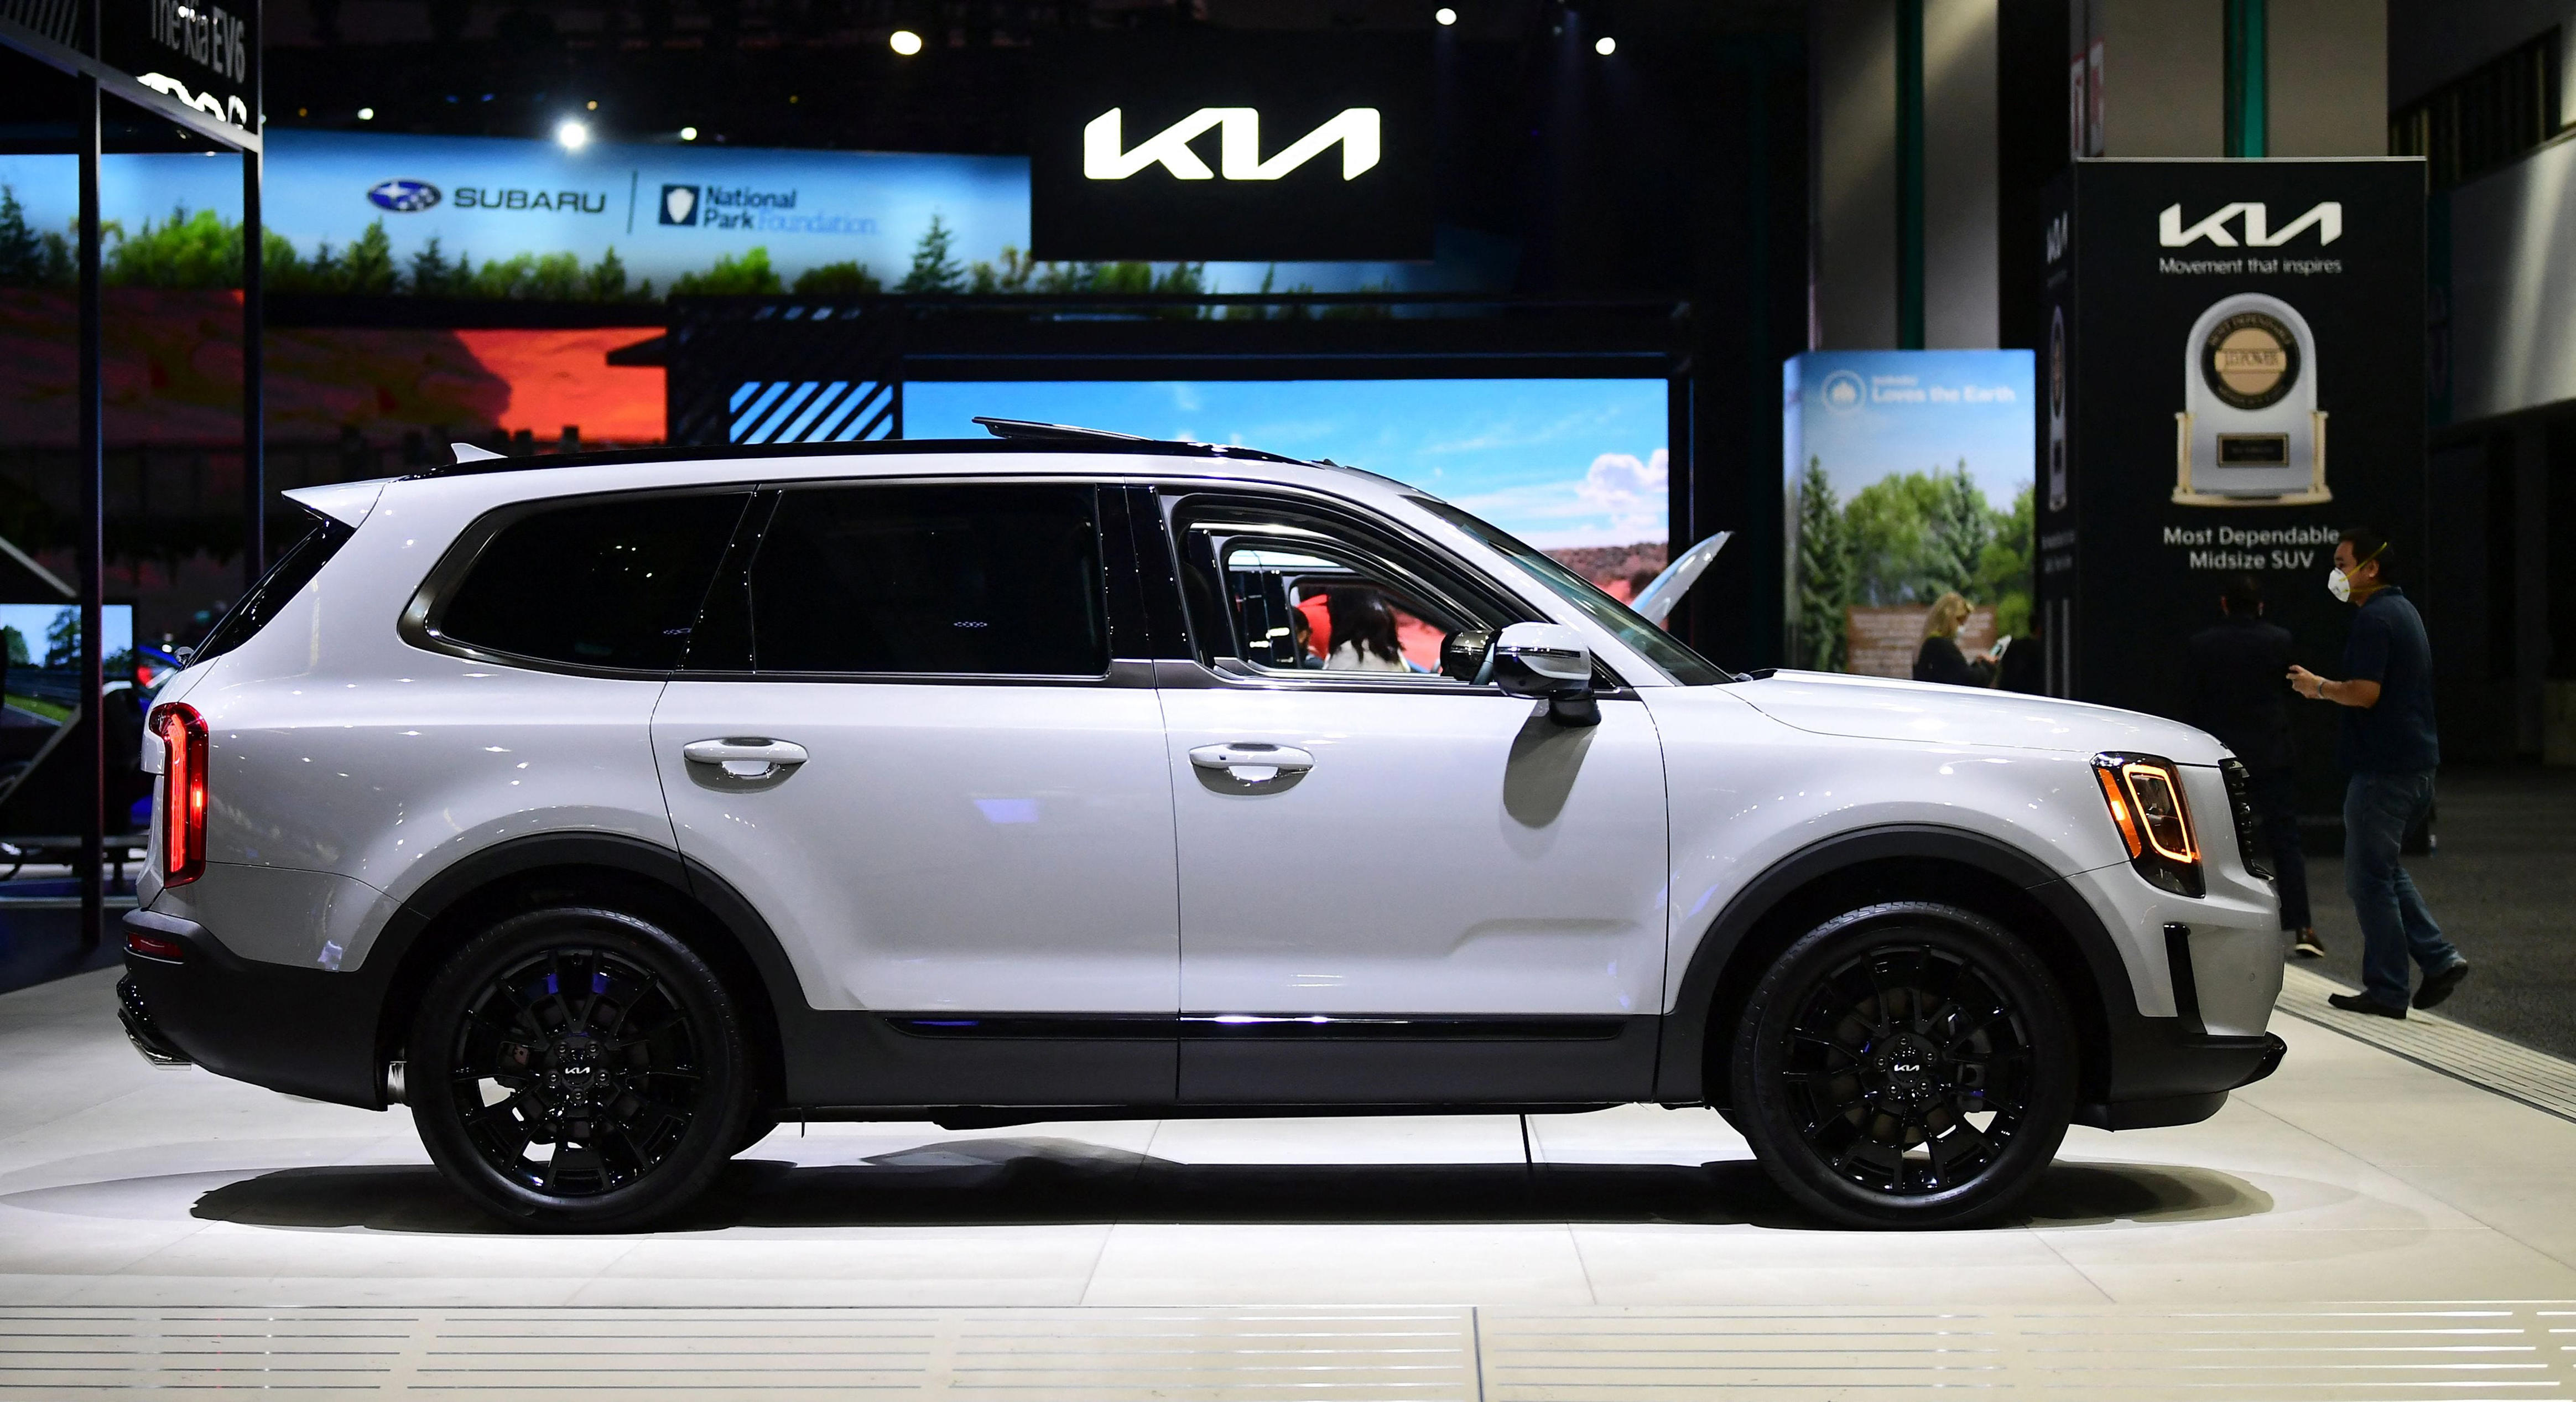 kia recalls 427,407 telluride vehicles for rollaway risk: see which cars are affected